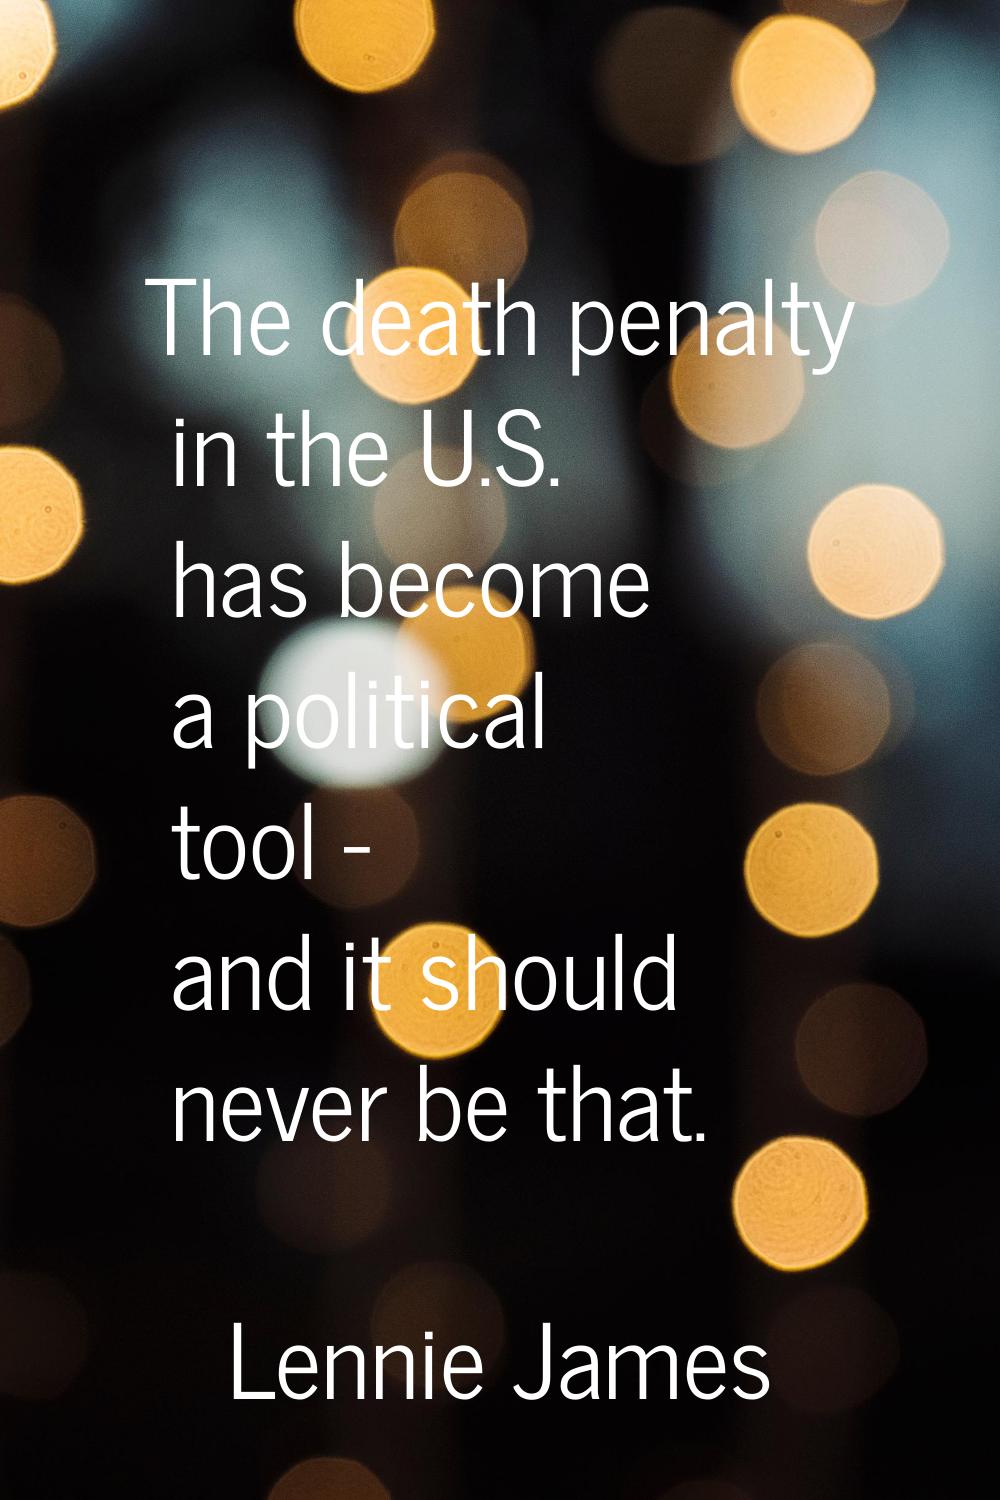 The death penalty in the U.S. has become a political tool - and it should never be that.